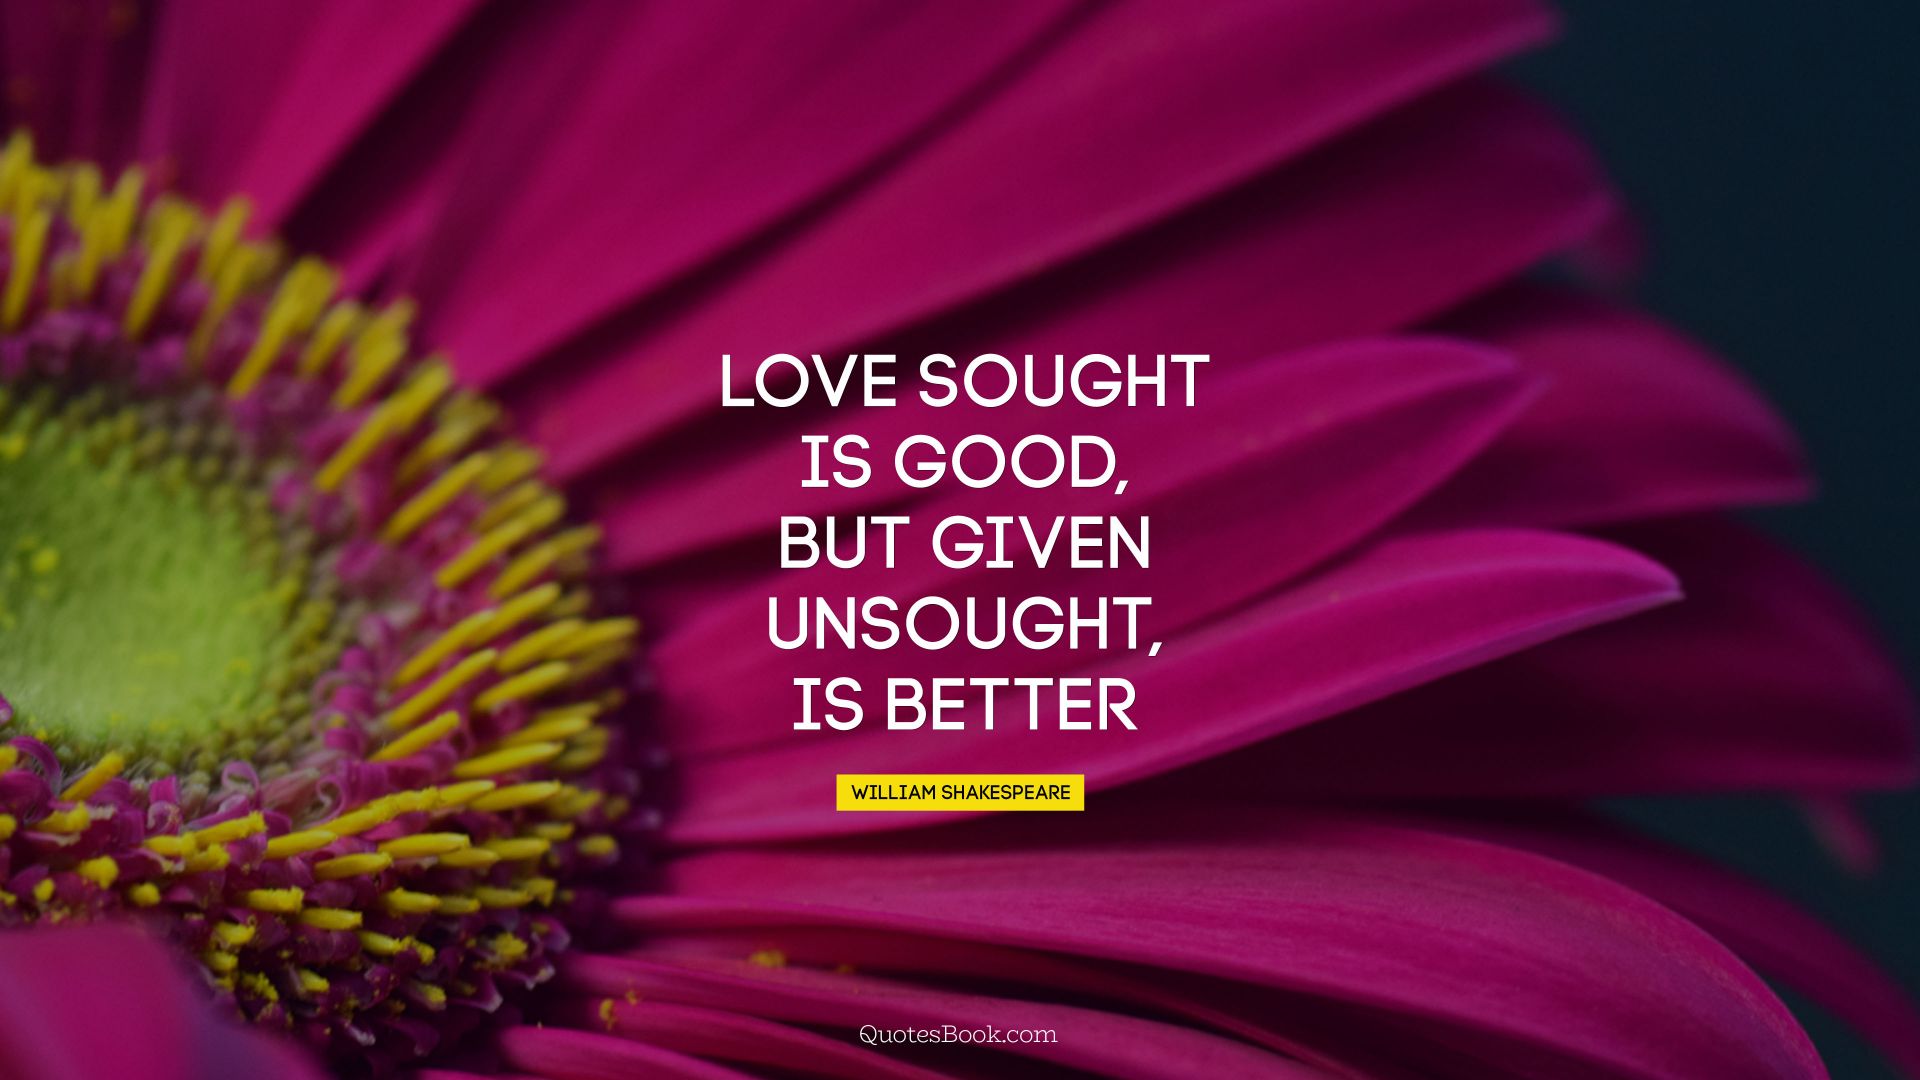 Love sought is good, but given unsought, is better. - Quote by William Shakespeare